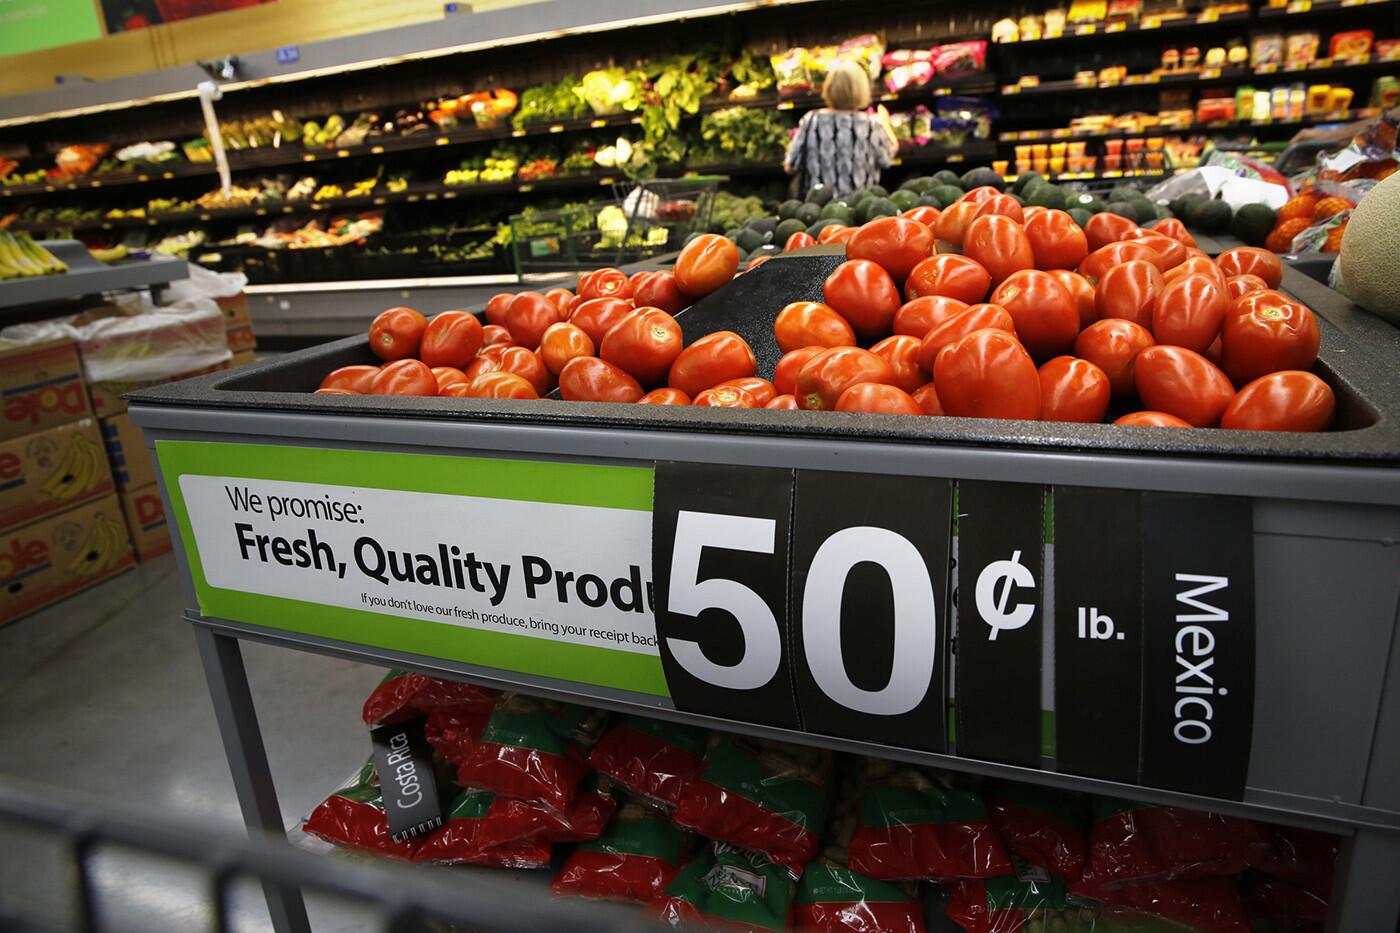 Roma tomatoes from Mexico on display in the produce section of a Wal-Mart store in San Marcos, Calif. The corporation sets stringent standards to ensure "fresh, quality produce" for its retail customers -- but health, and housing conditions for the people who pick the fruit on Mexican farms were found to be deplorable.